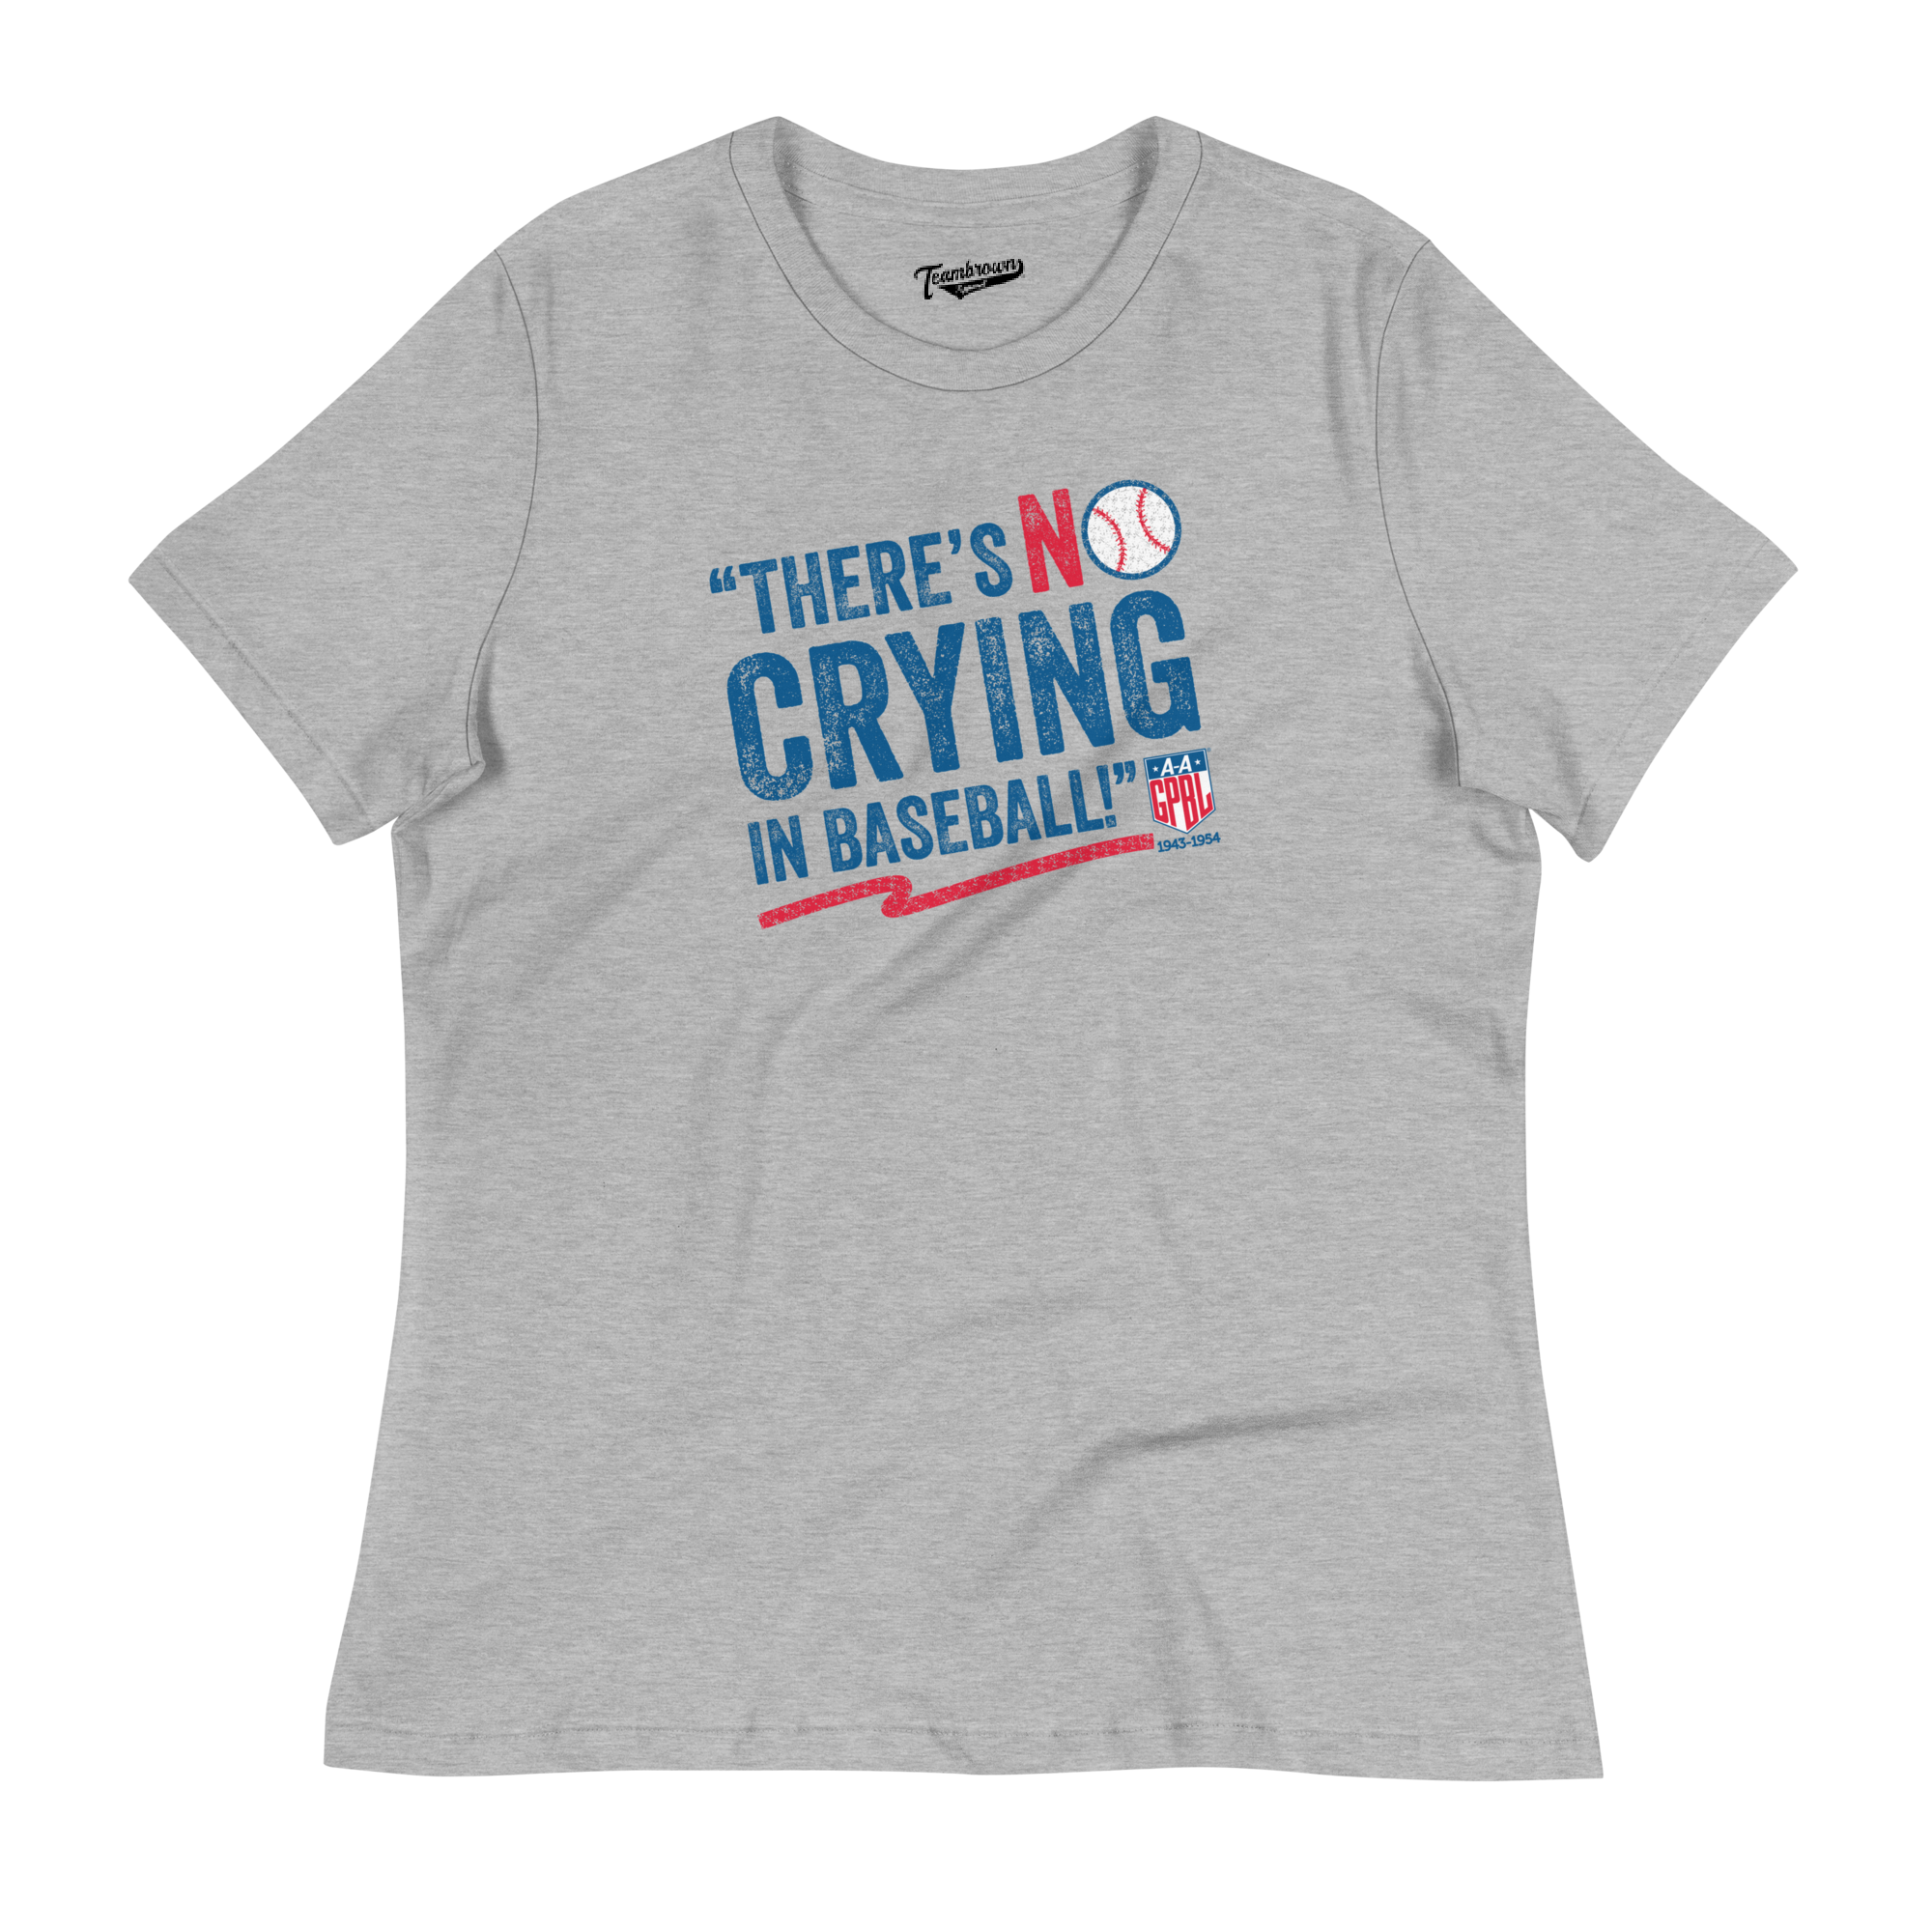 No Crying in Baseball - Women's Relaxed Fit T-Shirt | Officially Licensed - AAGPBL